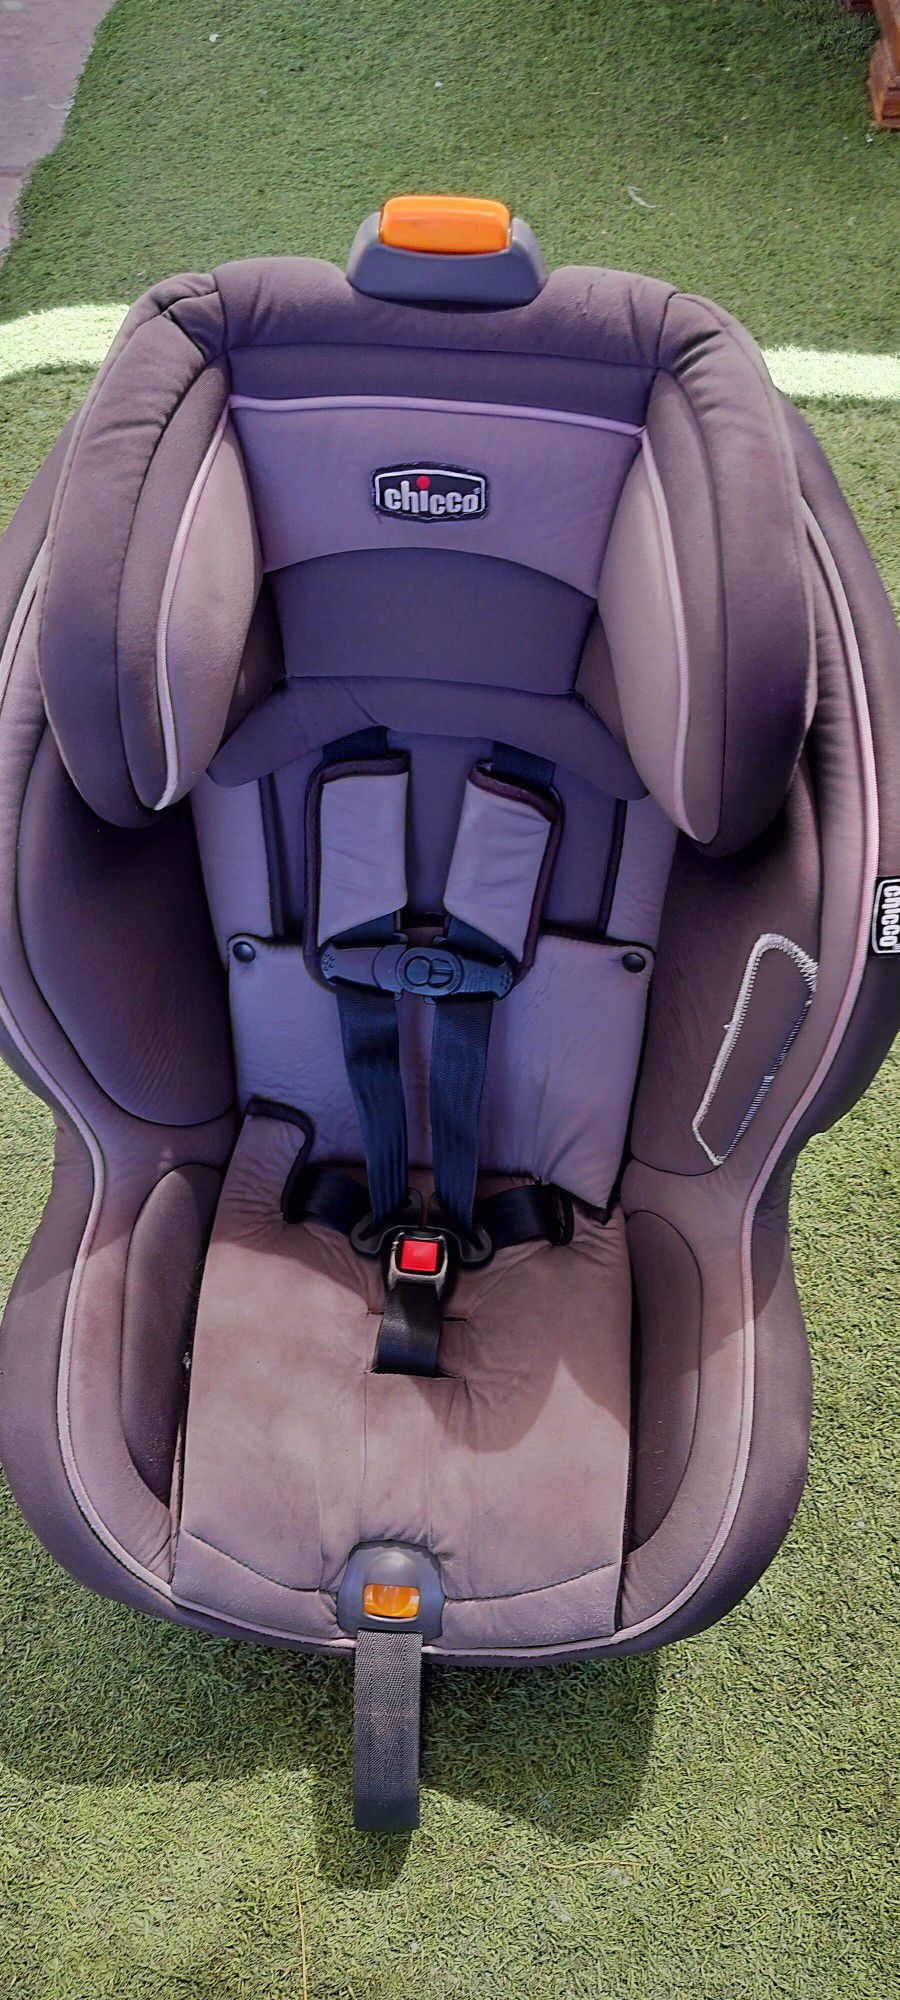 Car seat Convertible For Baby Or Toddler's $50  Pick Up Only Bonanza and Lamb 